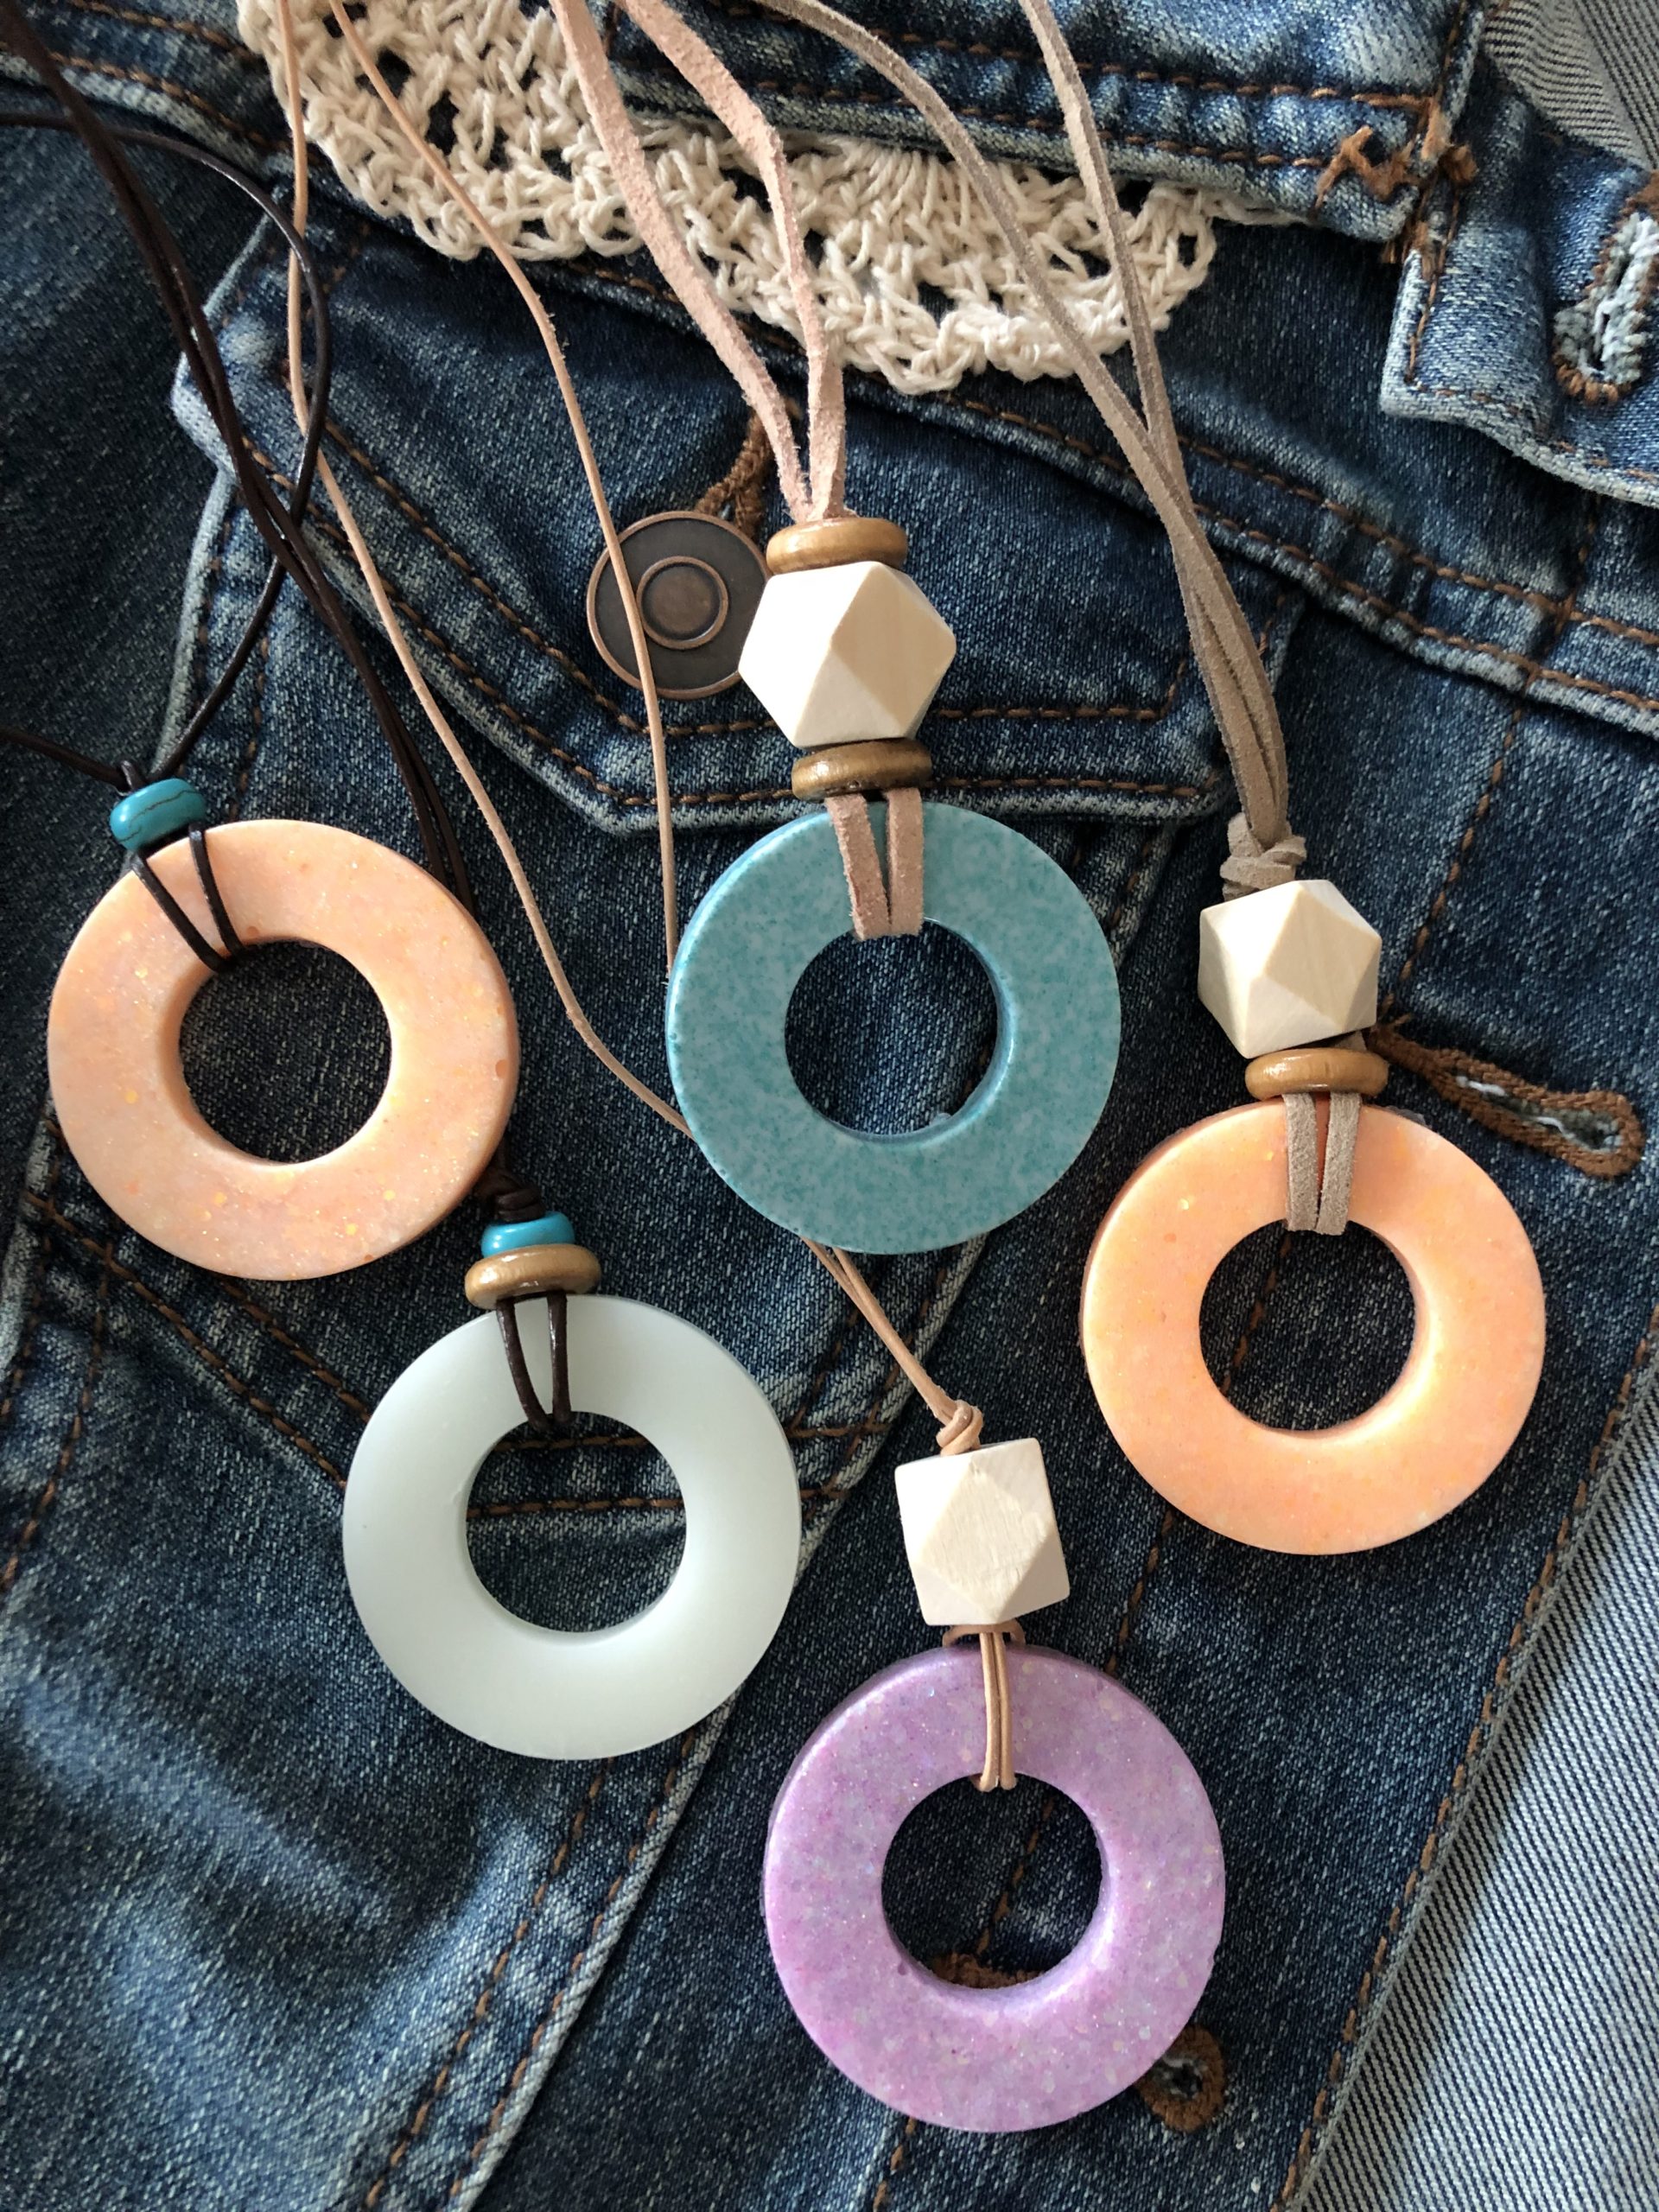 Essential Oil Diffuser Pendants with Sculpey Souffle Clay - CATHIE FILIAN's  Handmade Happy Hour